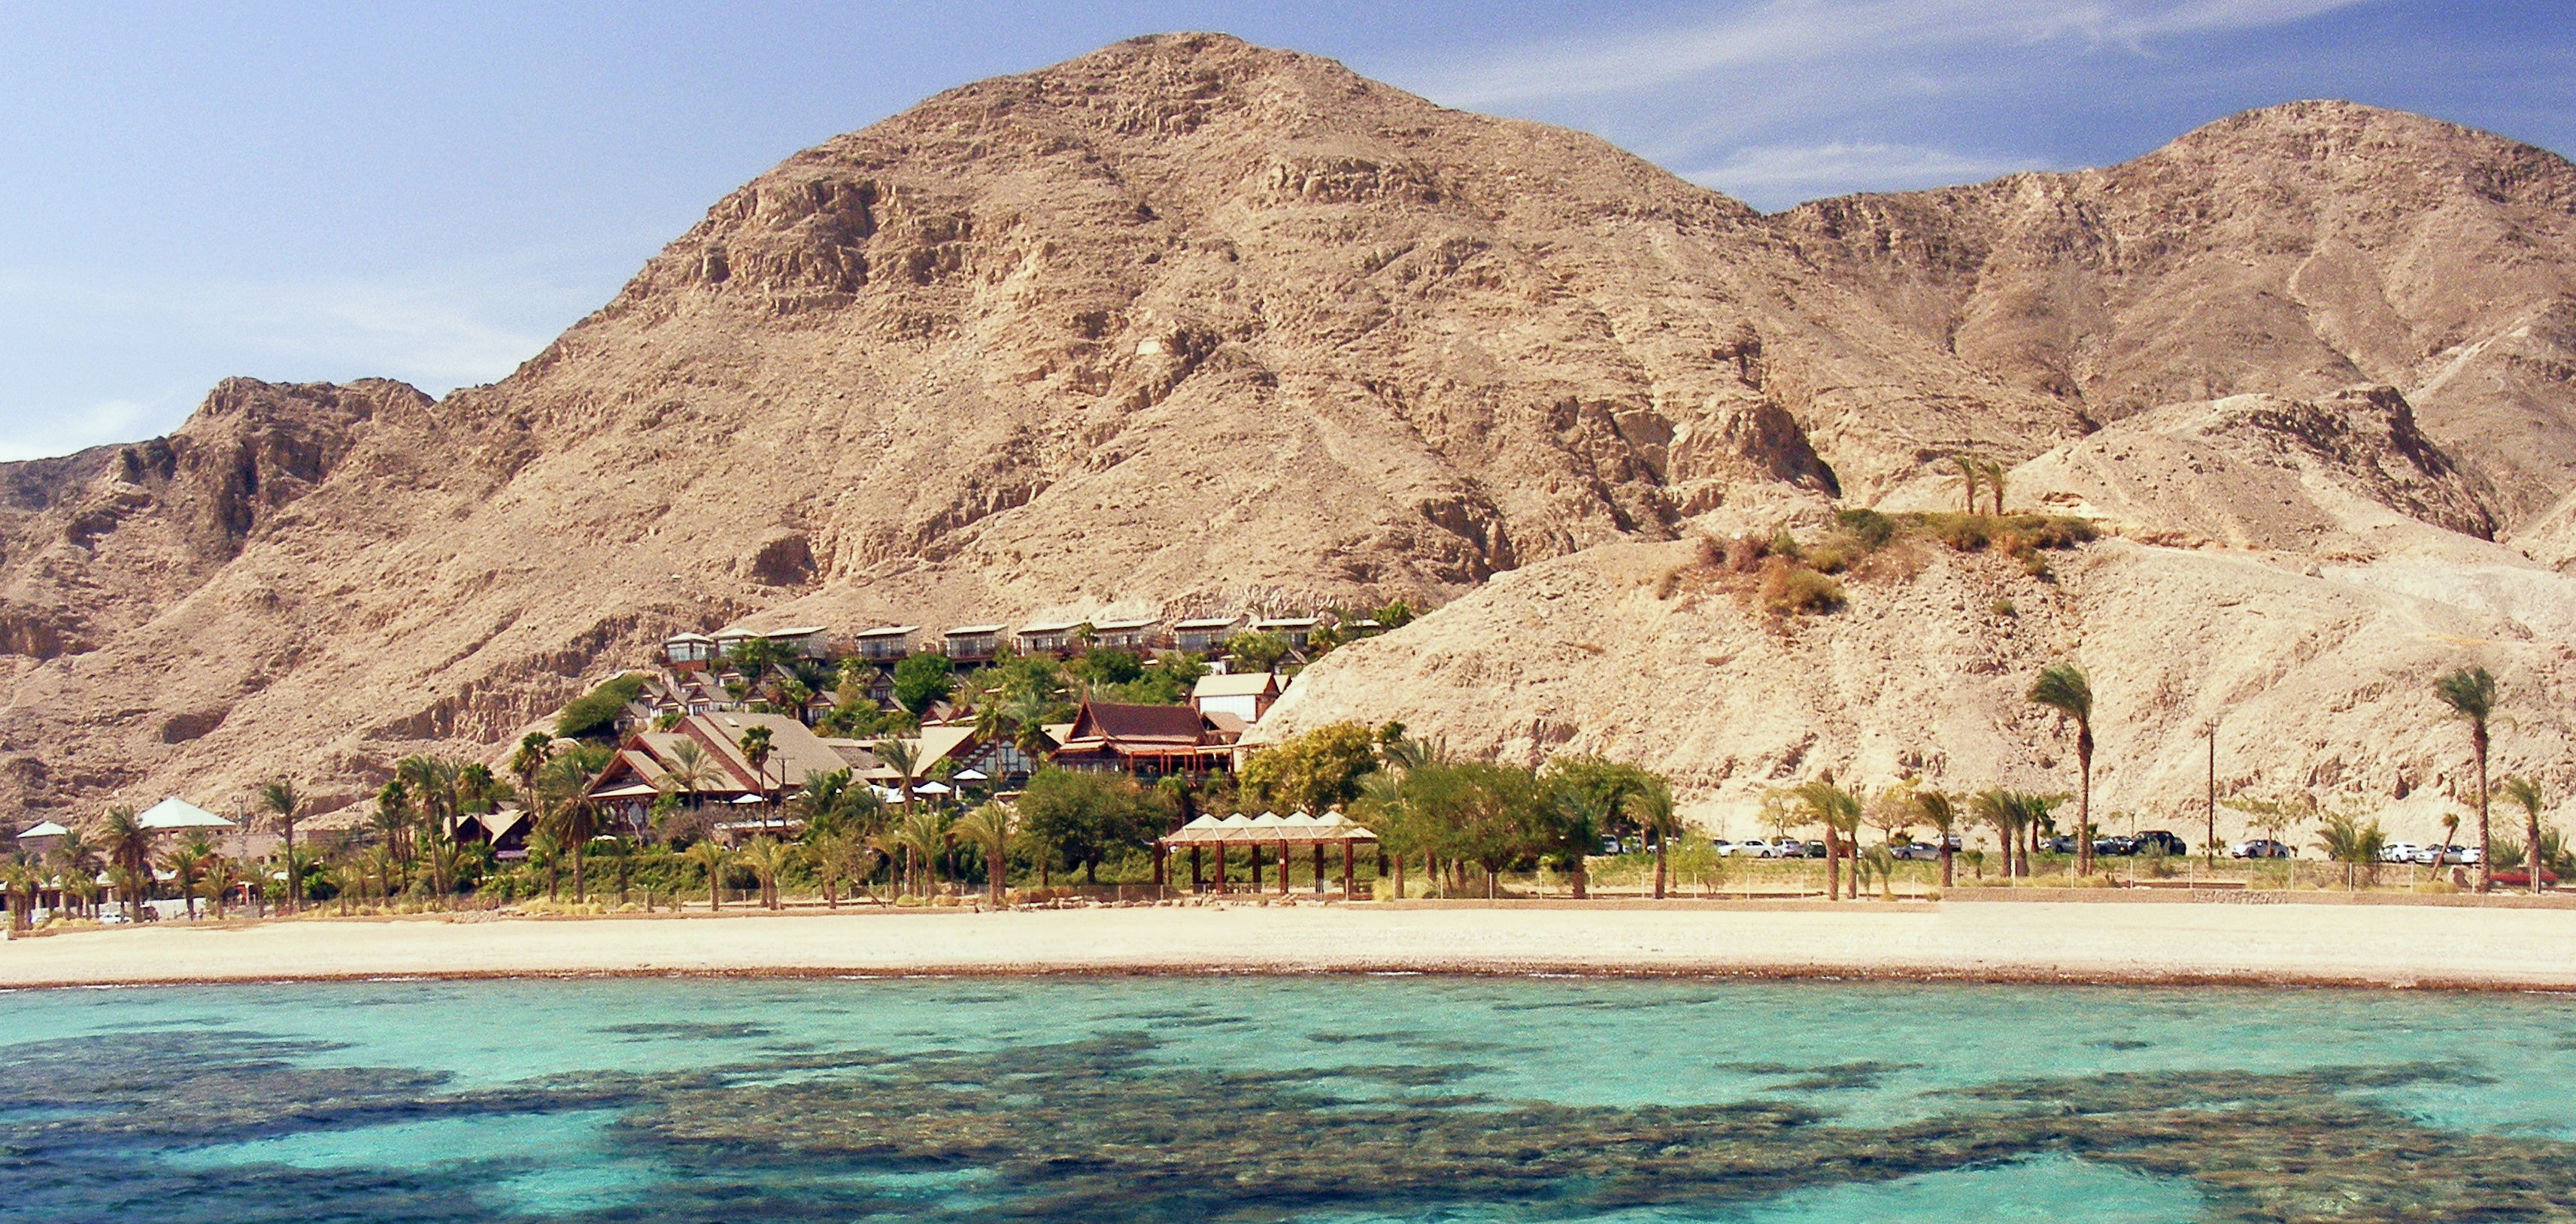 Panorama view of red sea mountain landscape from turquoise green waters. 